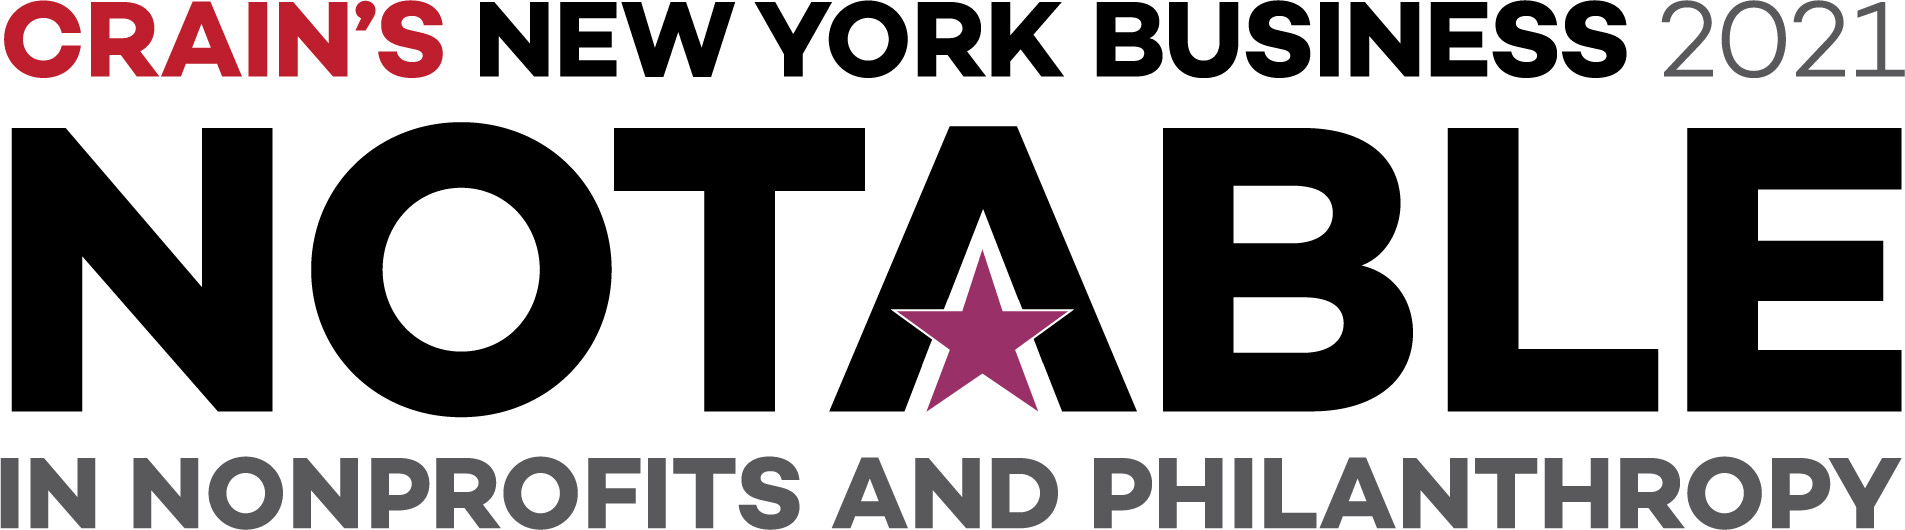 Healthy Humor’s Dina Paul-Parks Named to Crain’s New York Business 2021 List of Notables in Nonprofits and Philanthropy